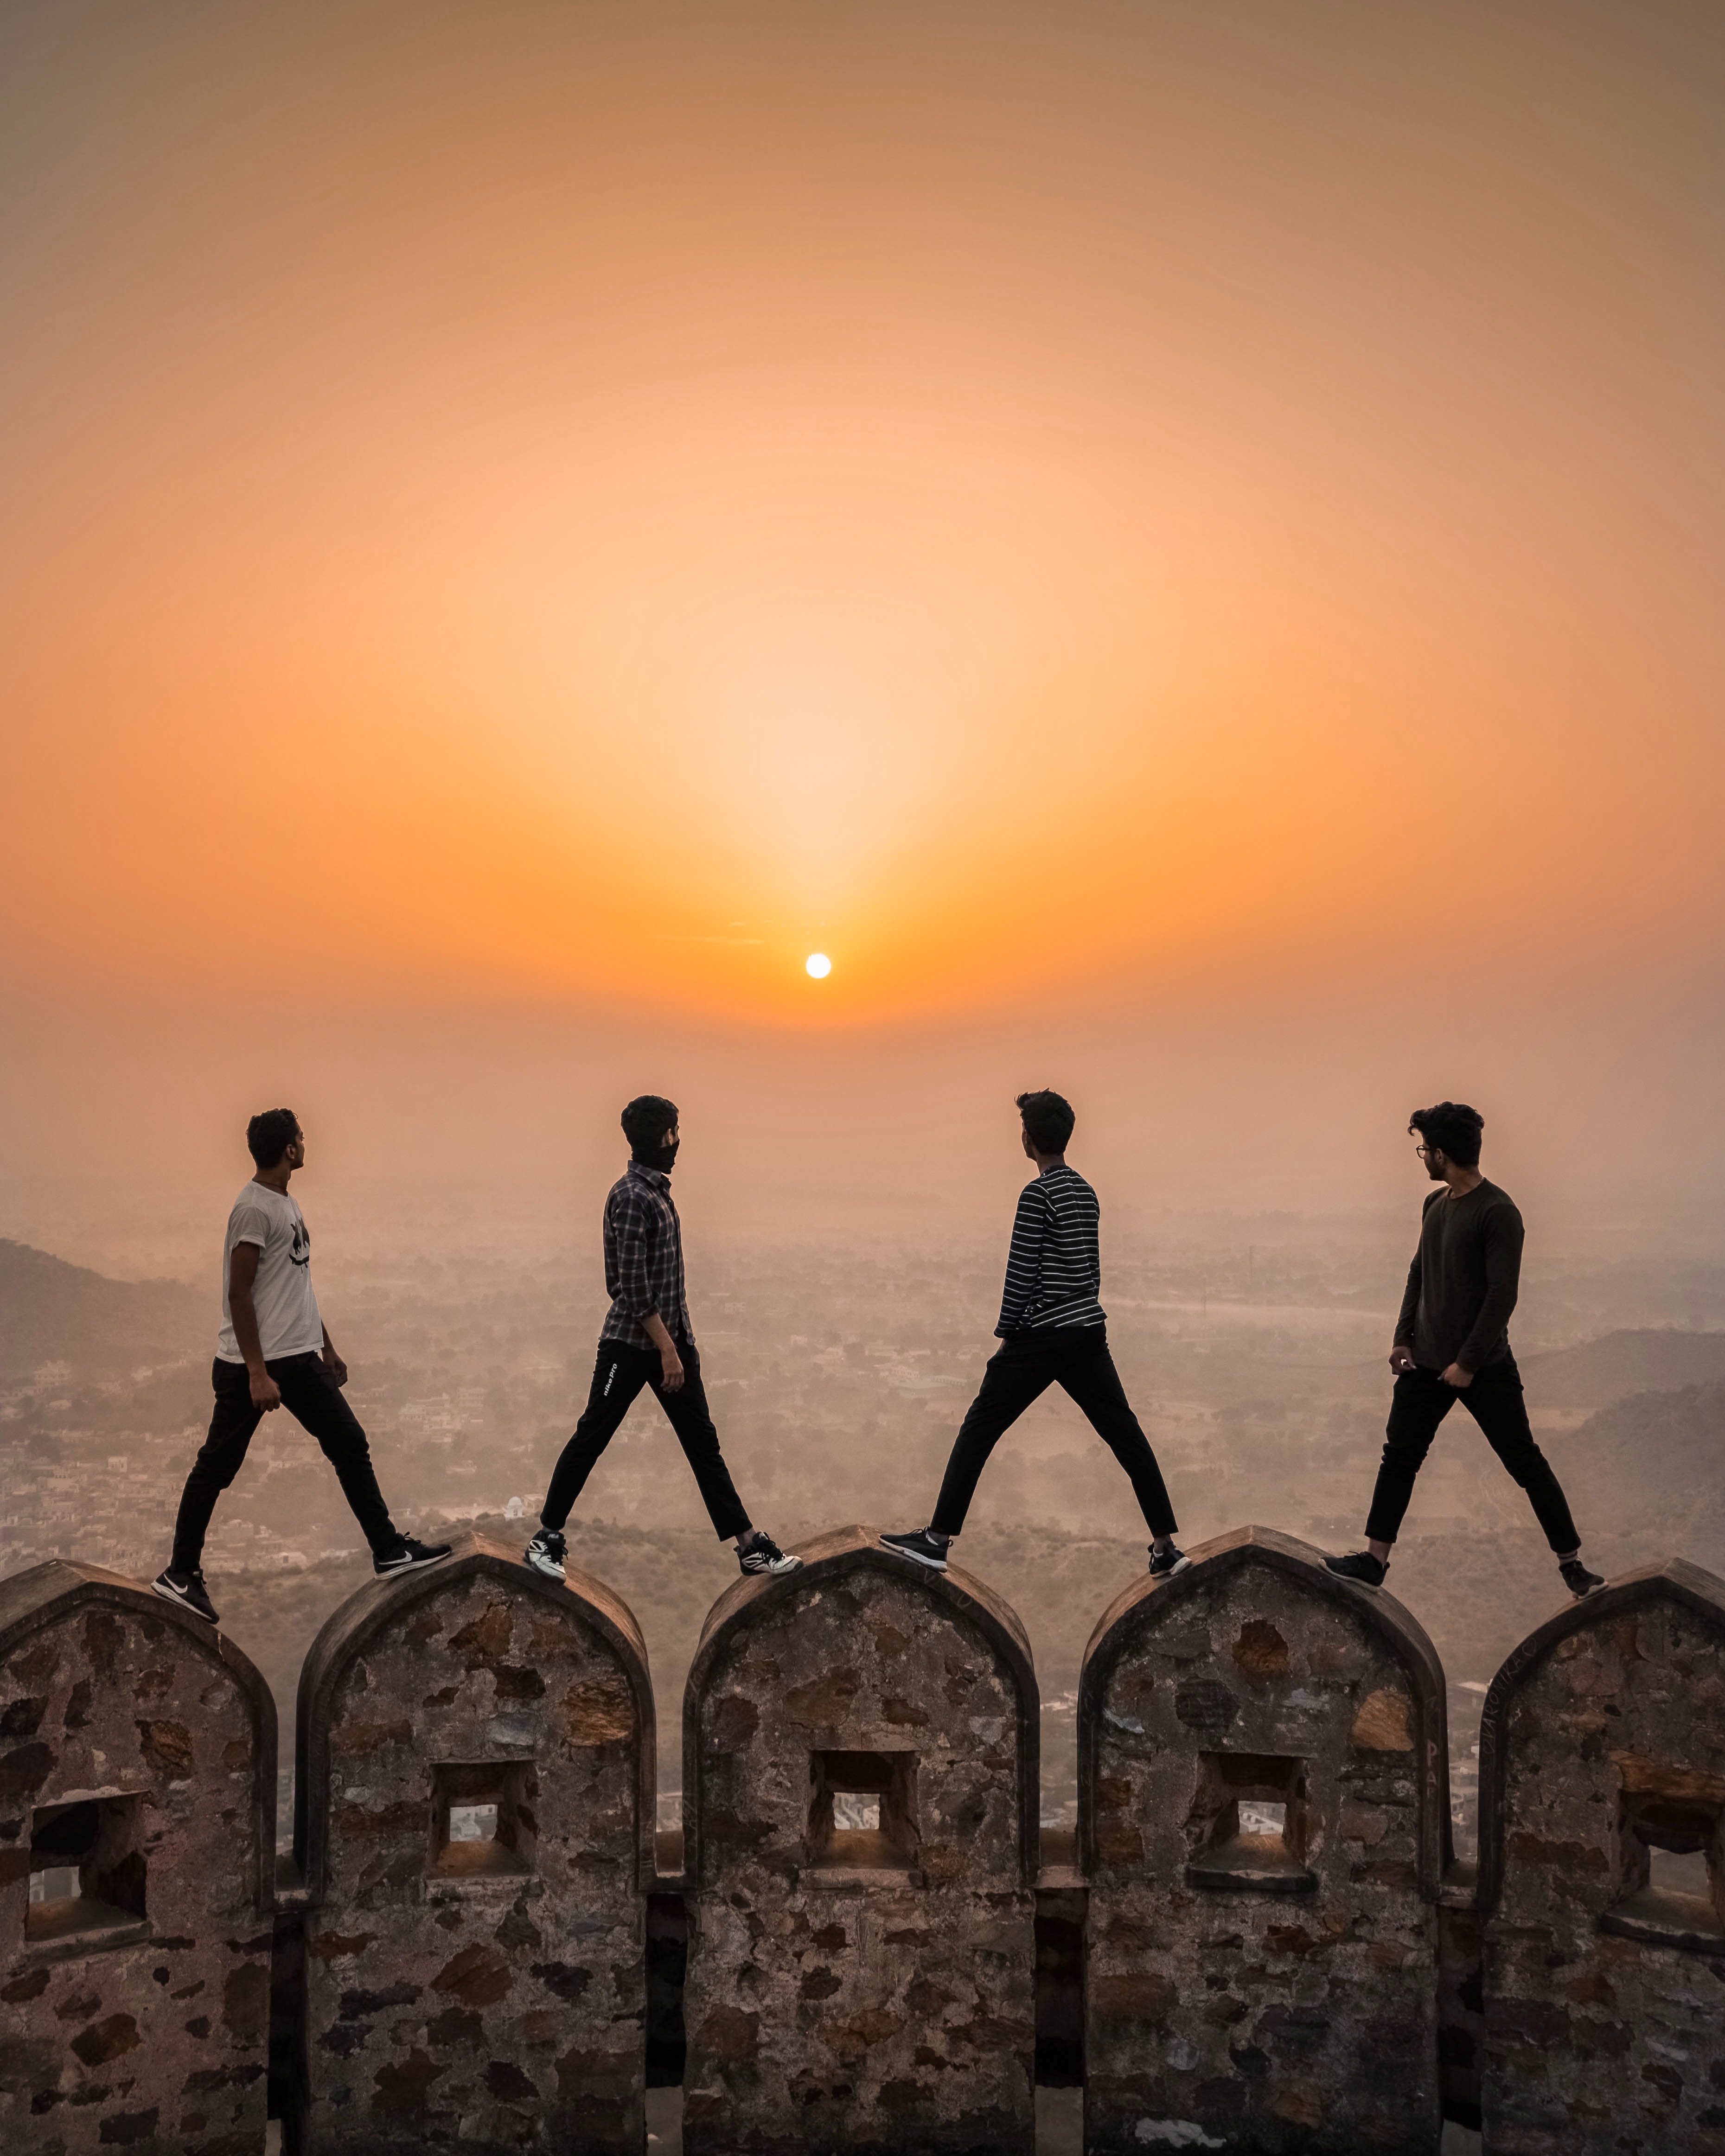 Four men, each standing on a turret, overlooking valley , looking at sunset, orange sky